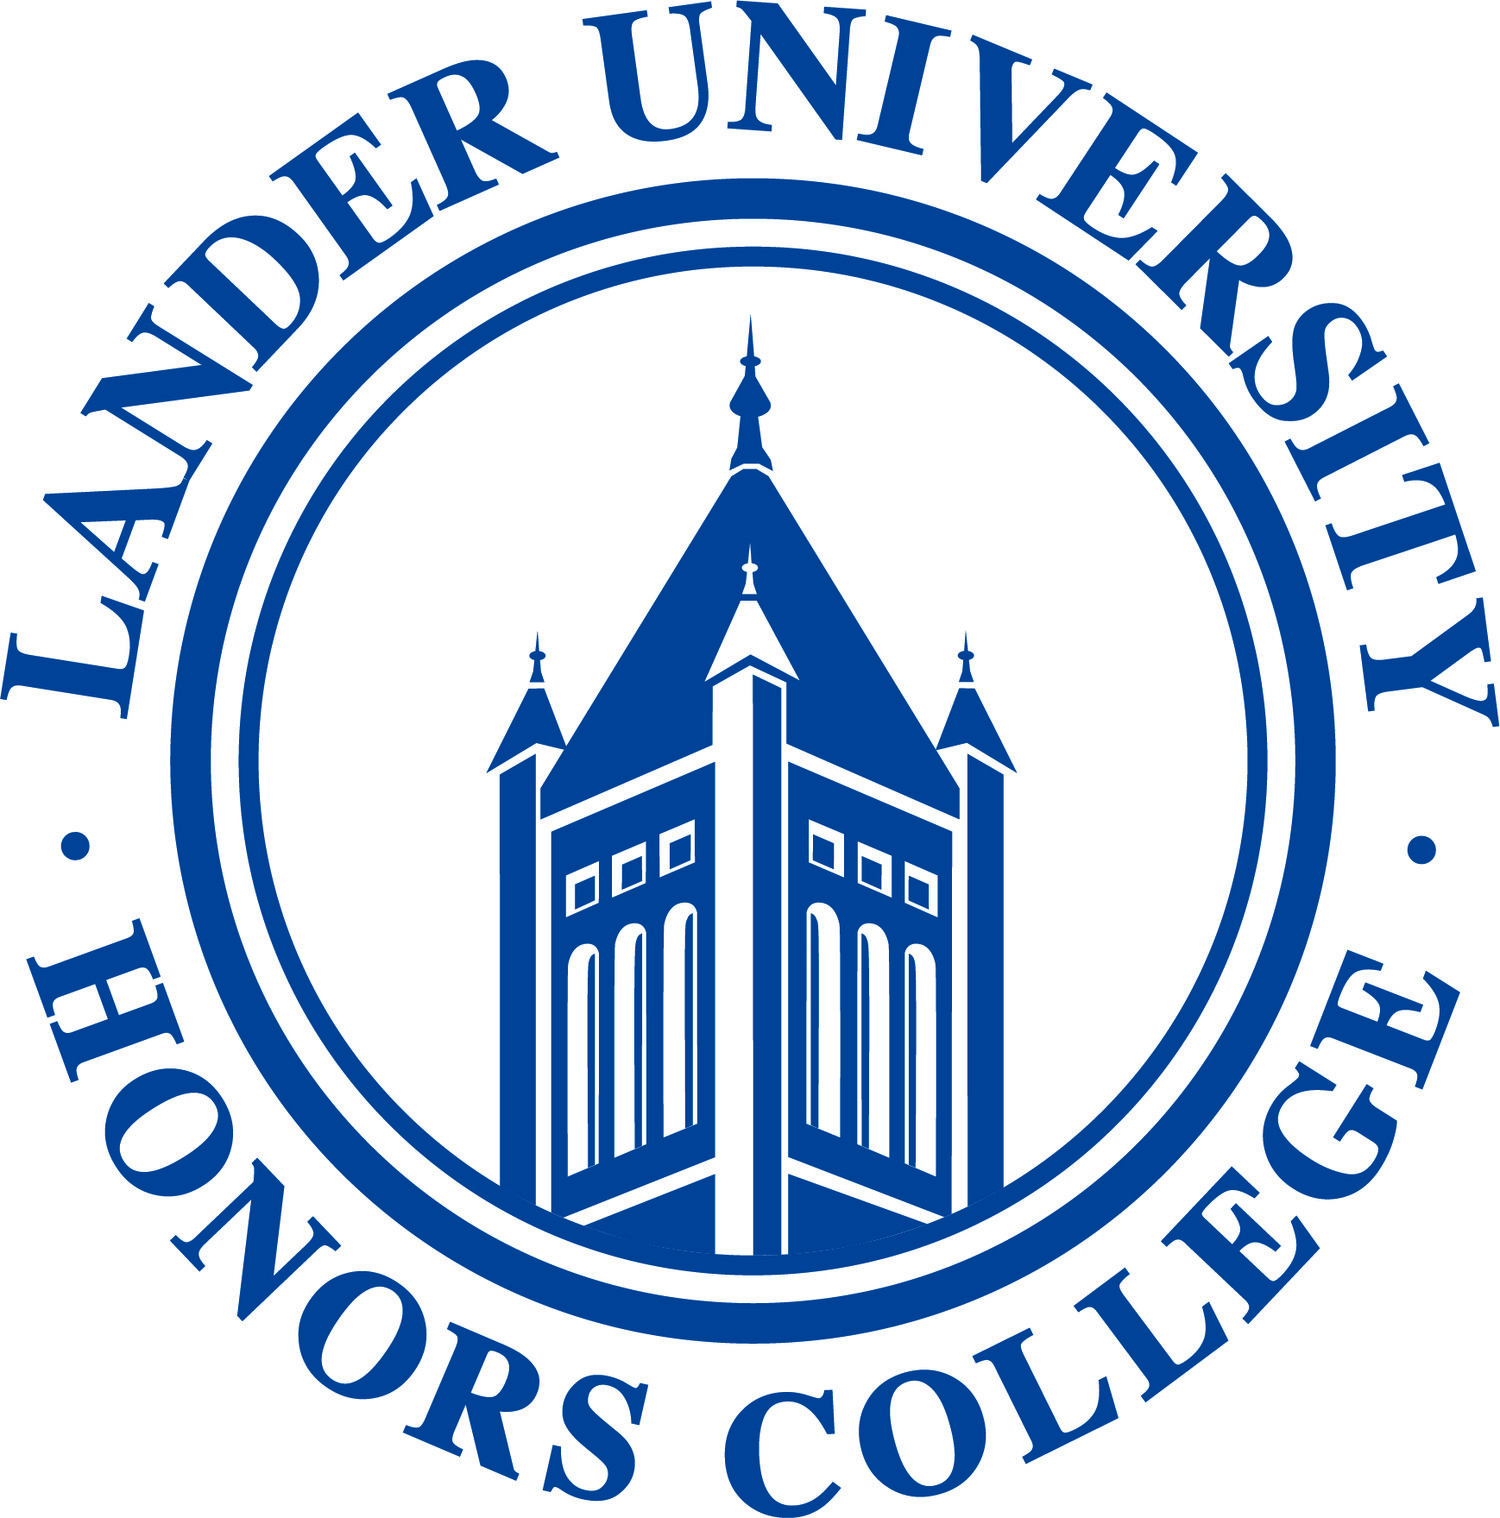 honors college logo